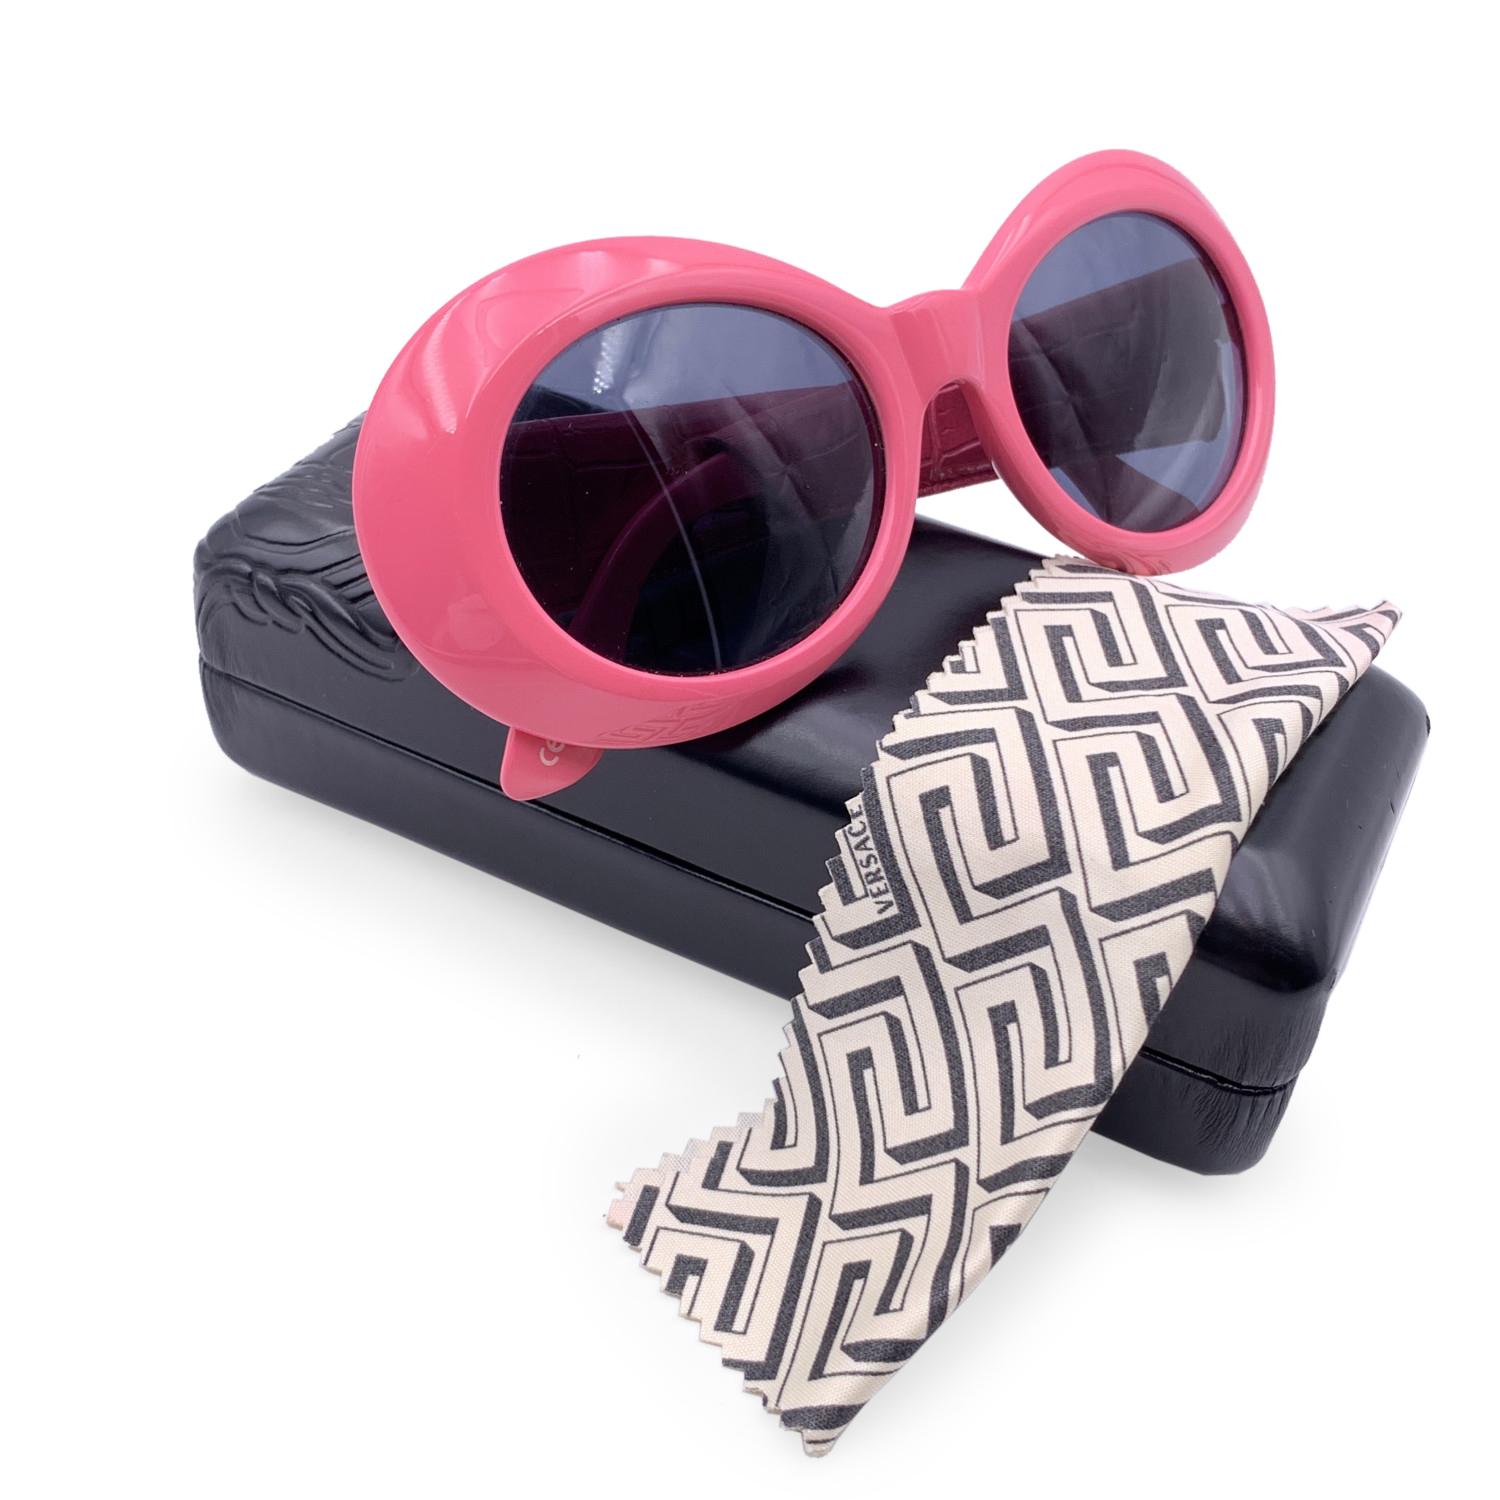 Beautiful vintage Versace Mod 418/P Col. 930 sunglasses in pink color. Distinctive thick rounded front frame. Pink leather wrapped arms with croc embossed leather. Gold metal MEDUSA heads on temples. Marked on inner arm 'GIANNI VERSACE - made in